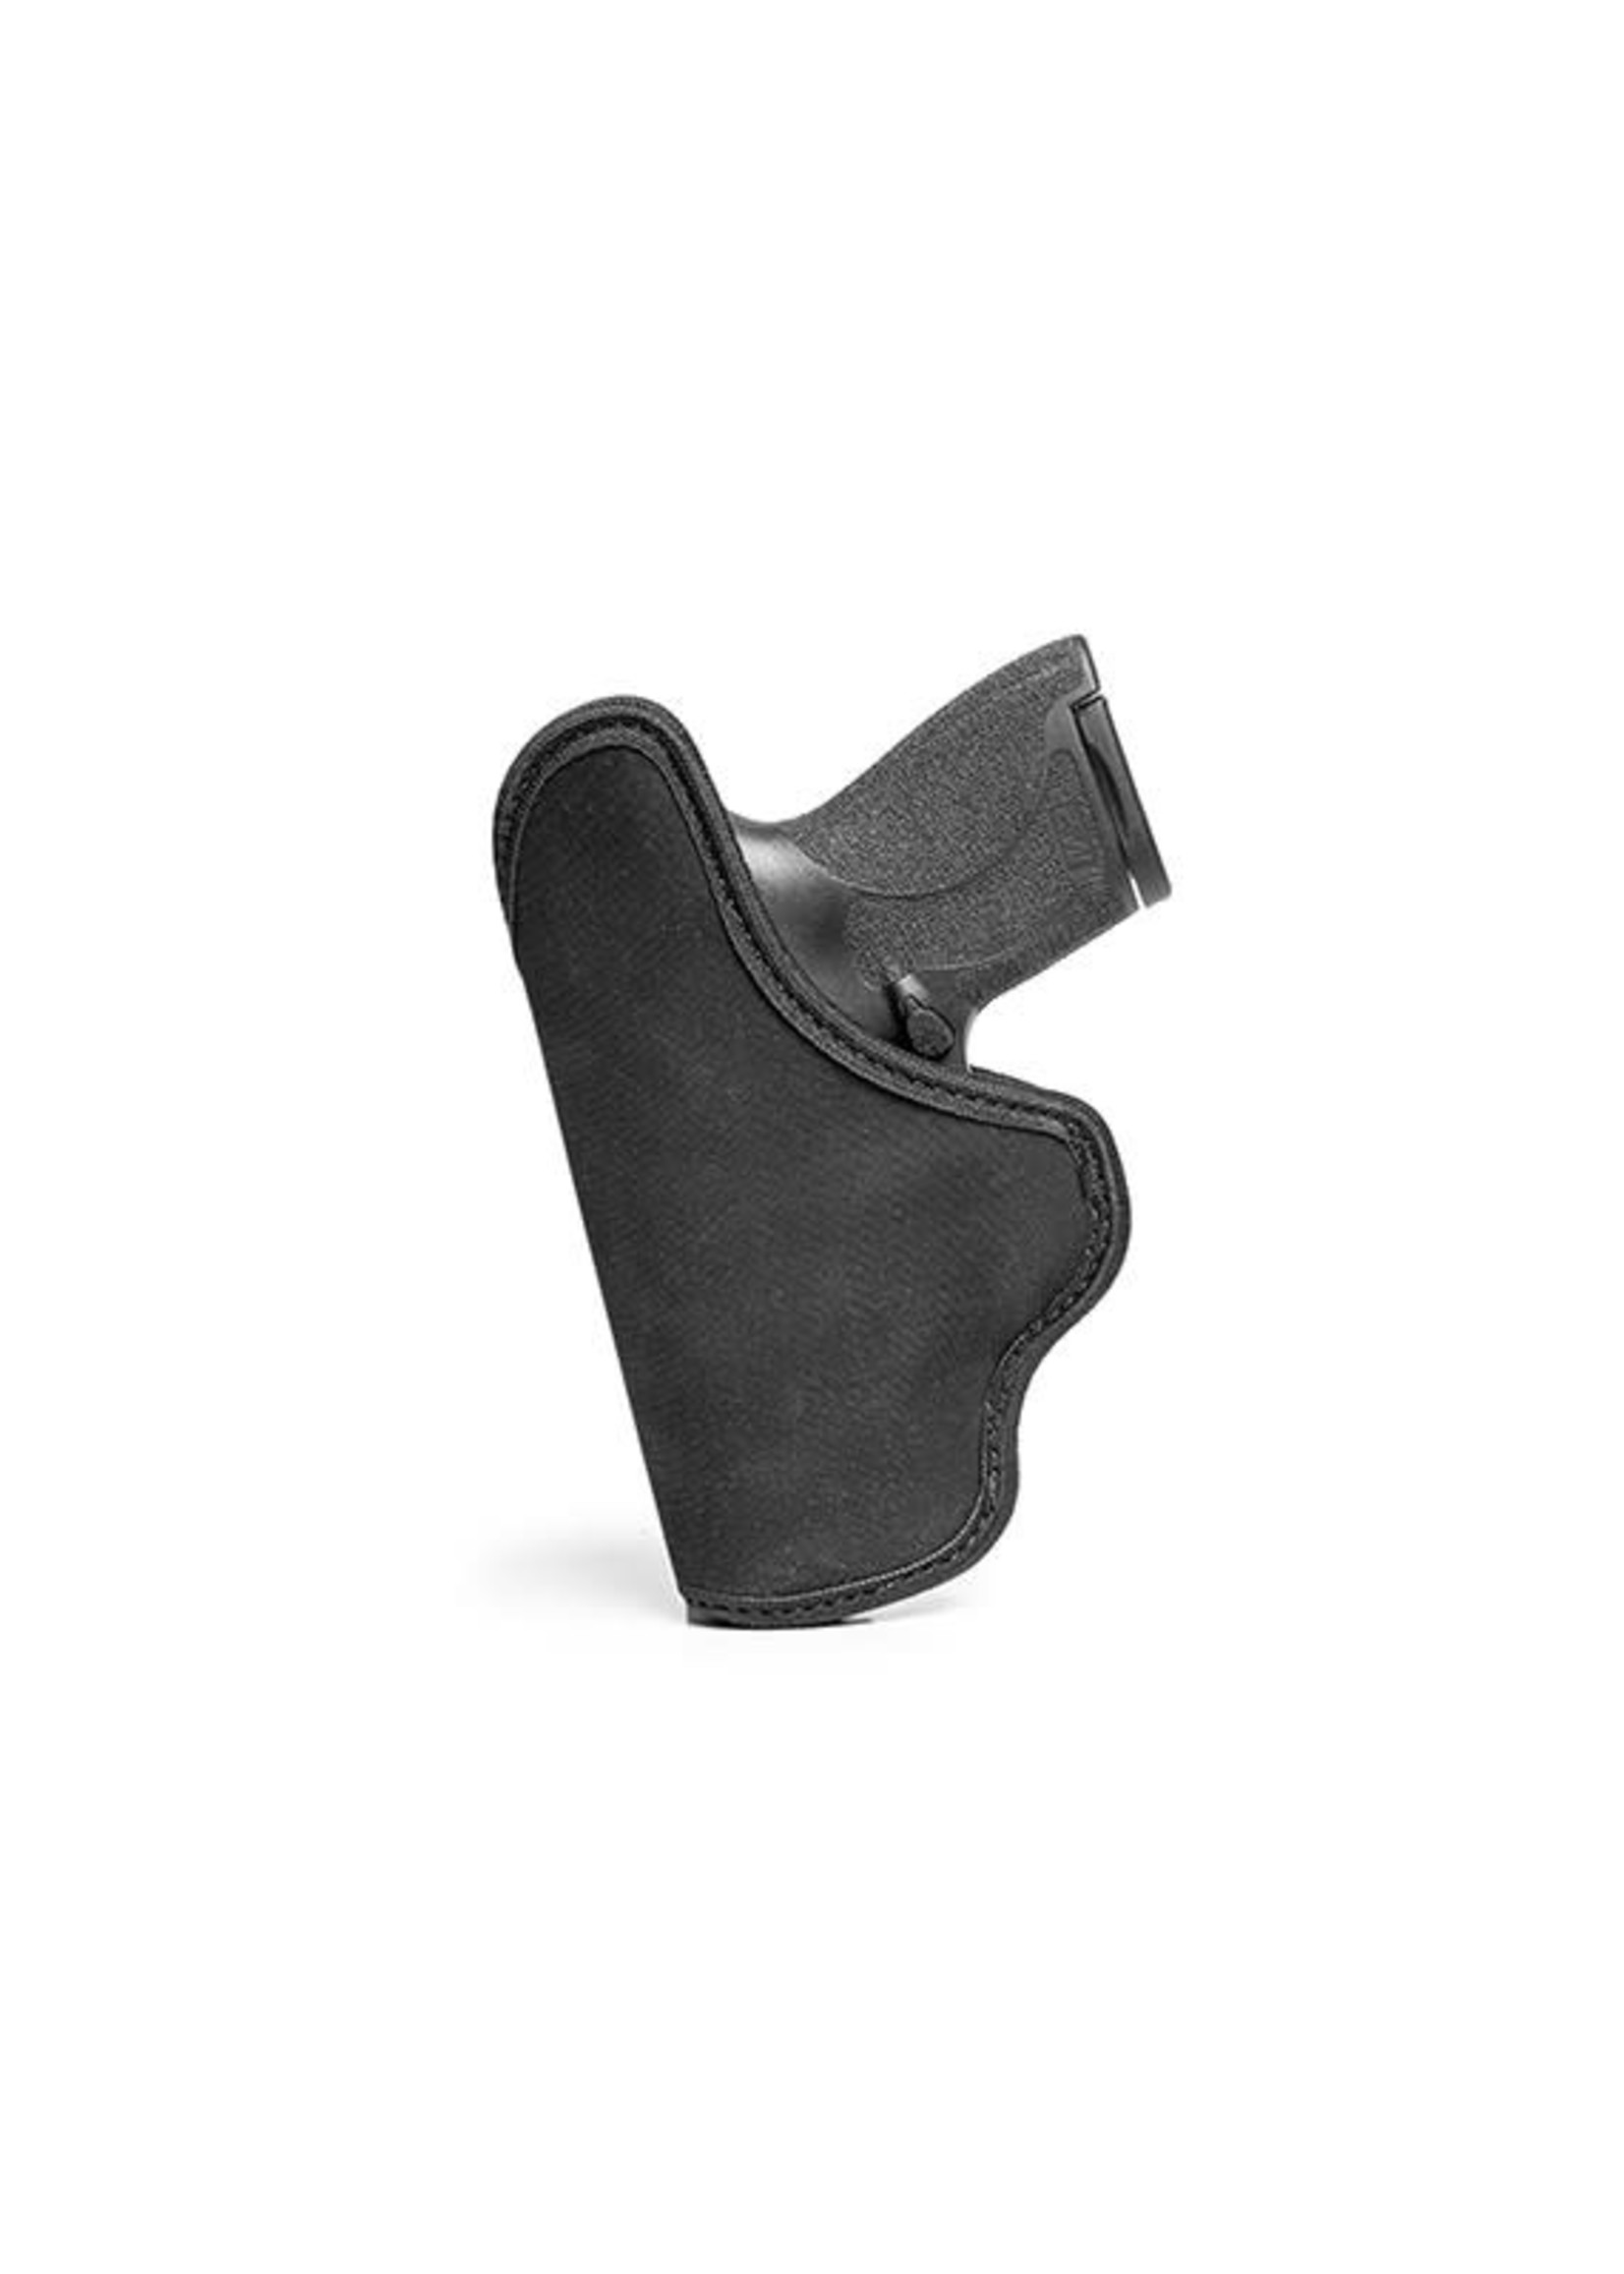 Alien Gear Holsters Alien Gear Grip Tuck Universal Holster - Subcompact, LH, Double Stack